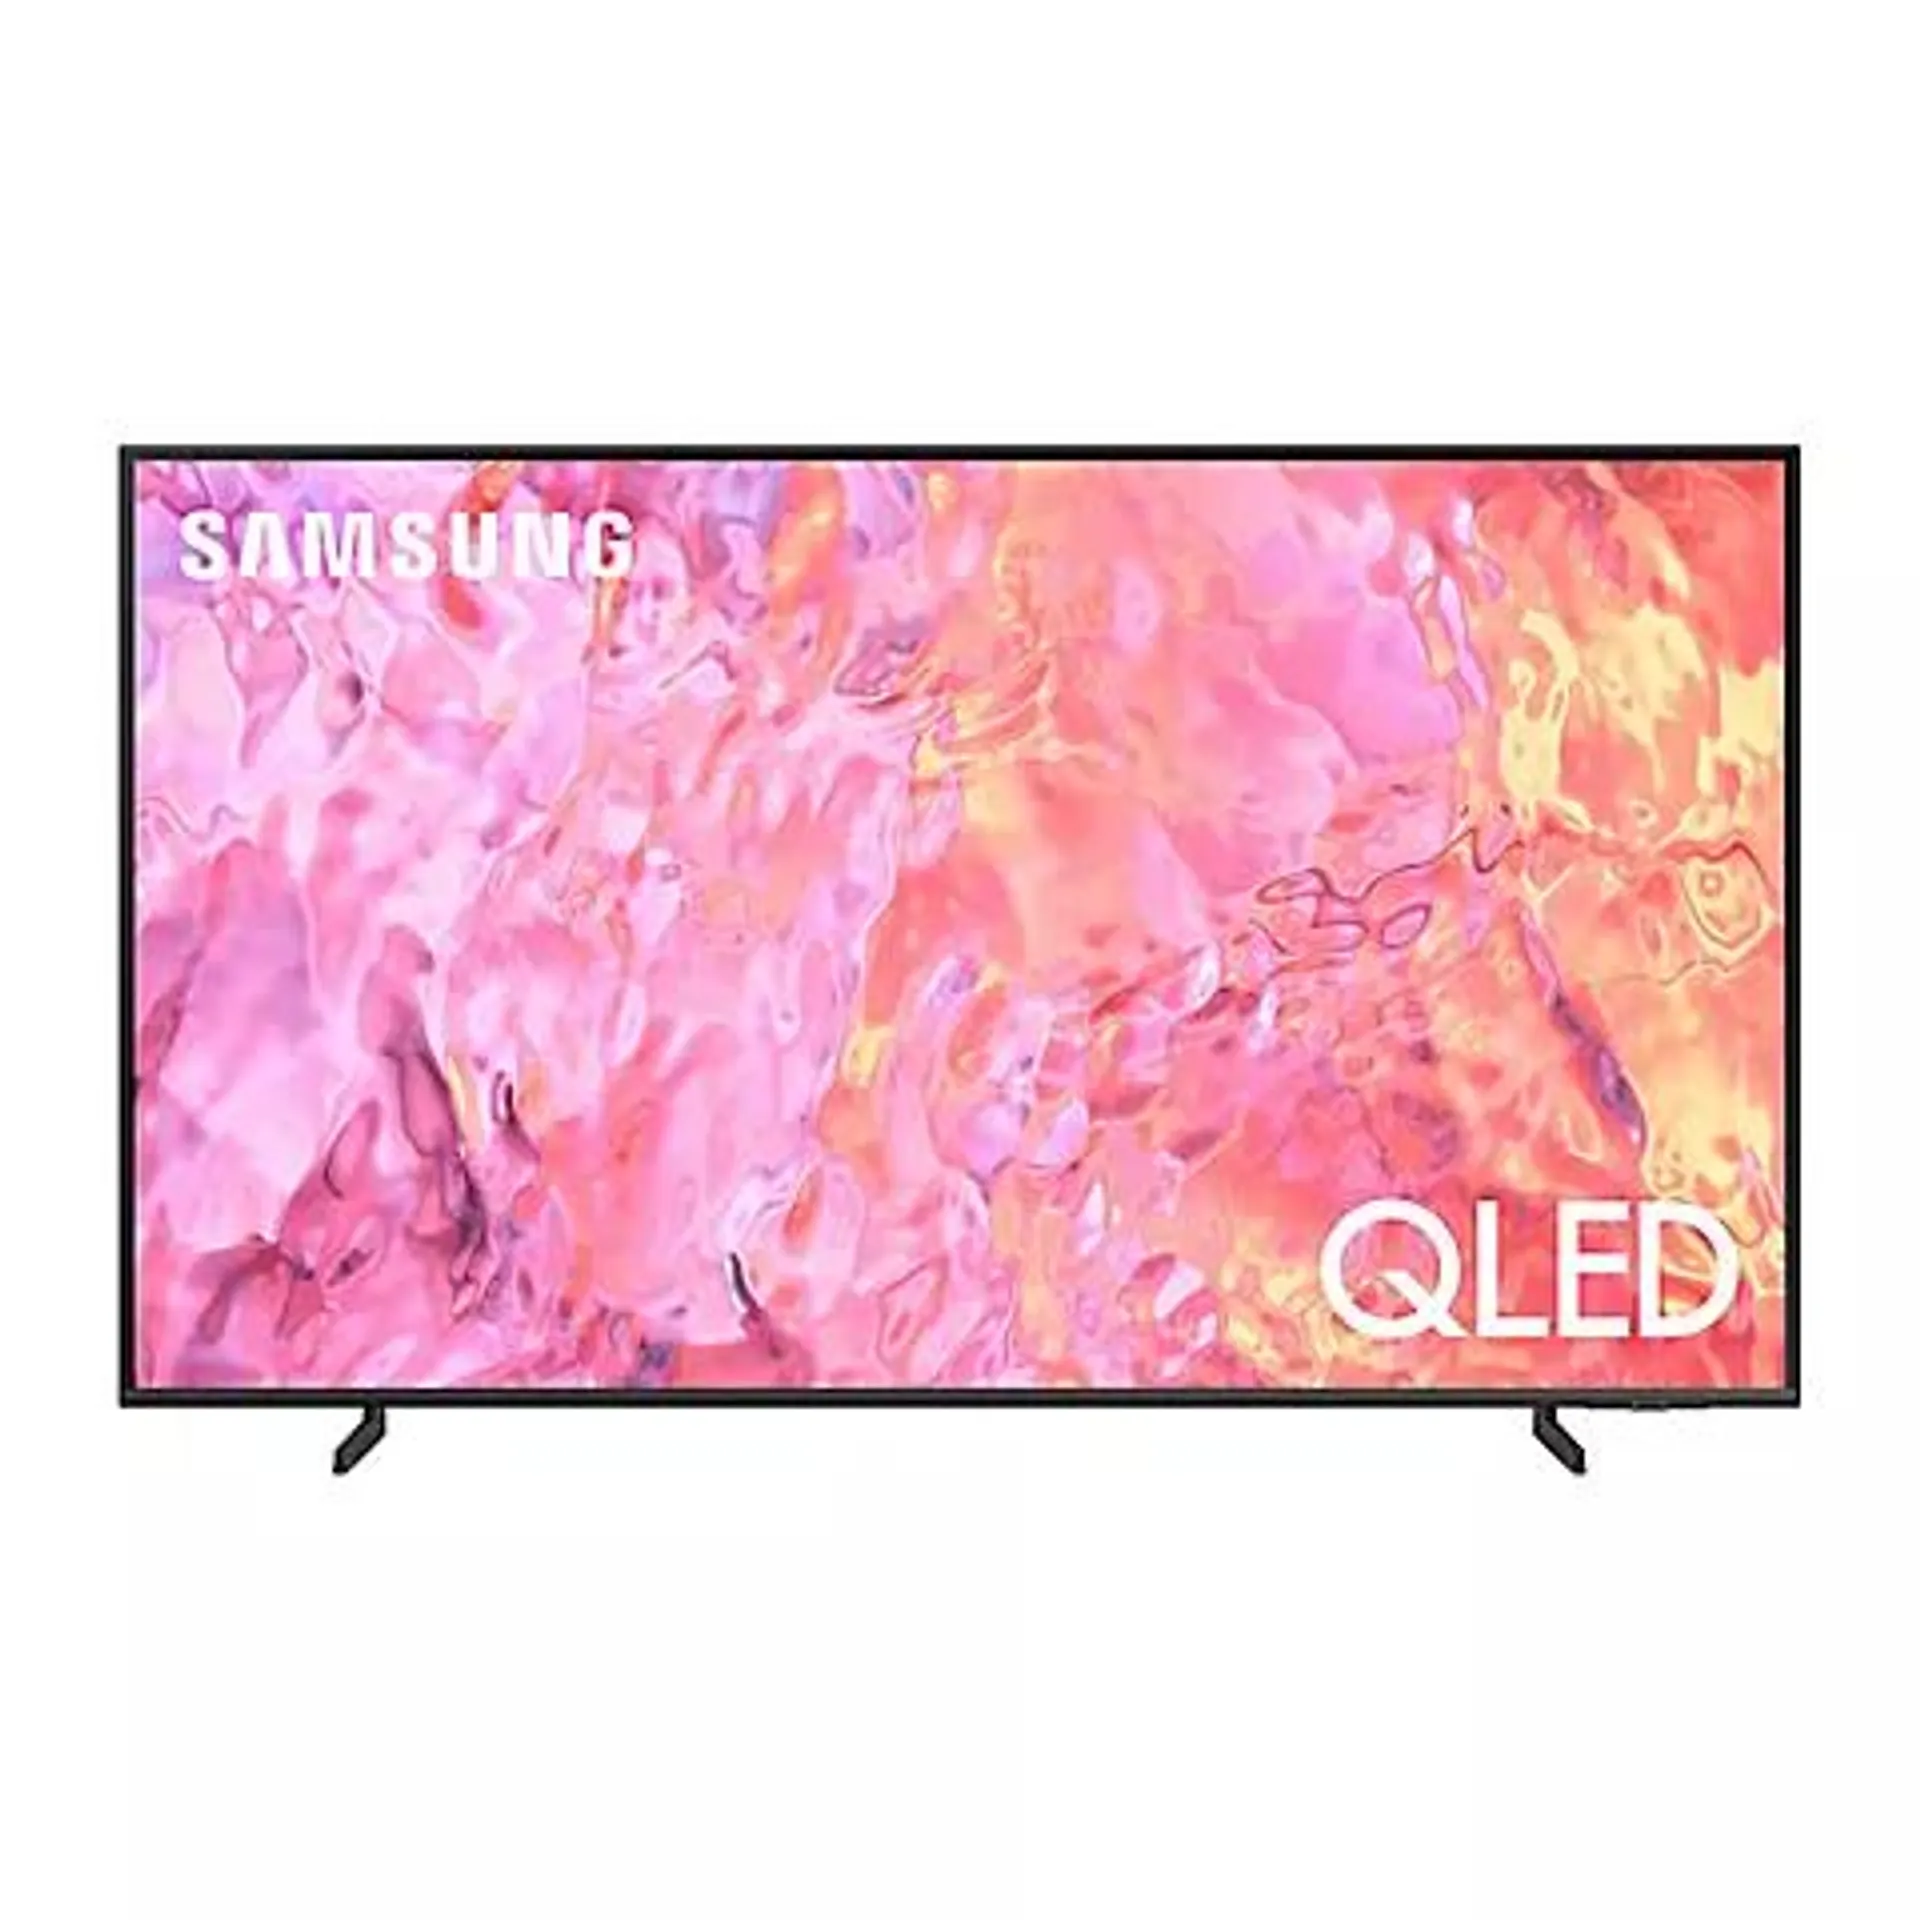 Samsung 75" Q60CD QLED 4K Smart TV with Your Choice Subscription and 5-Year Coverage